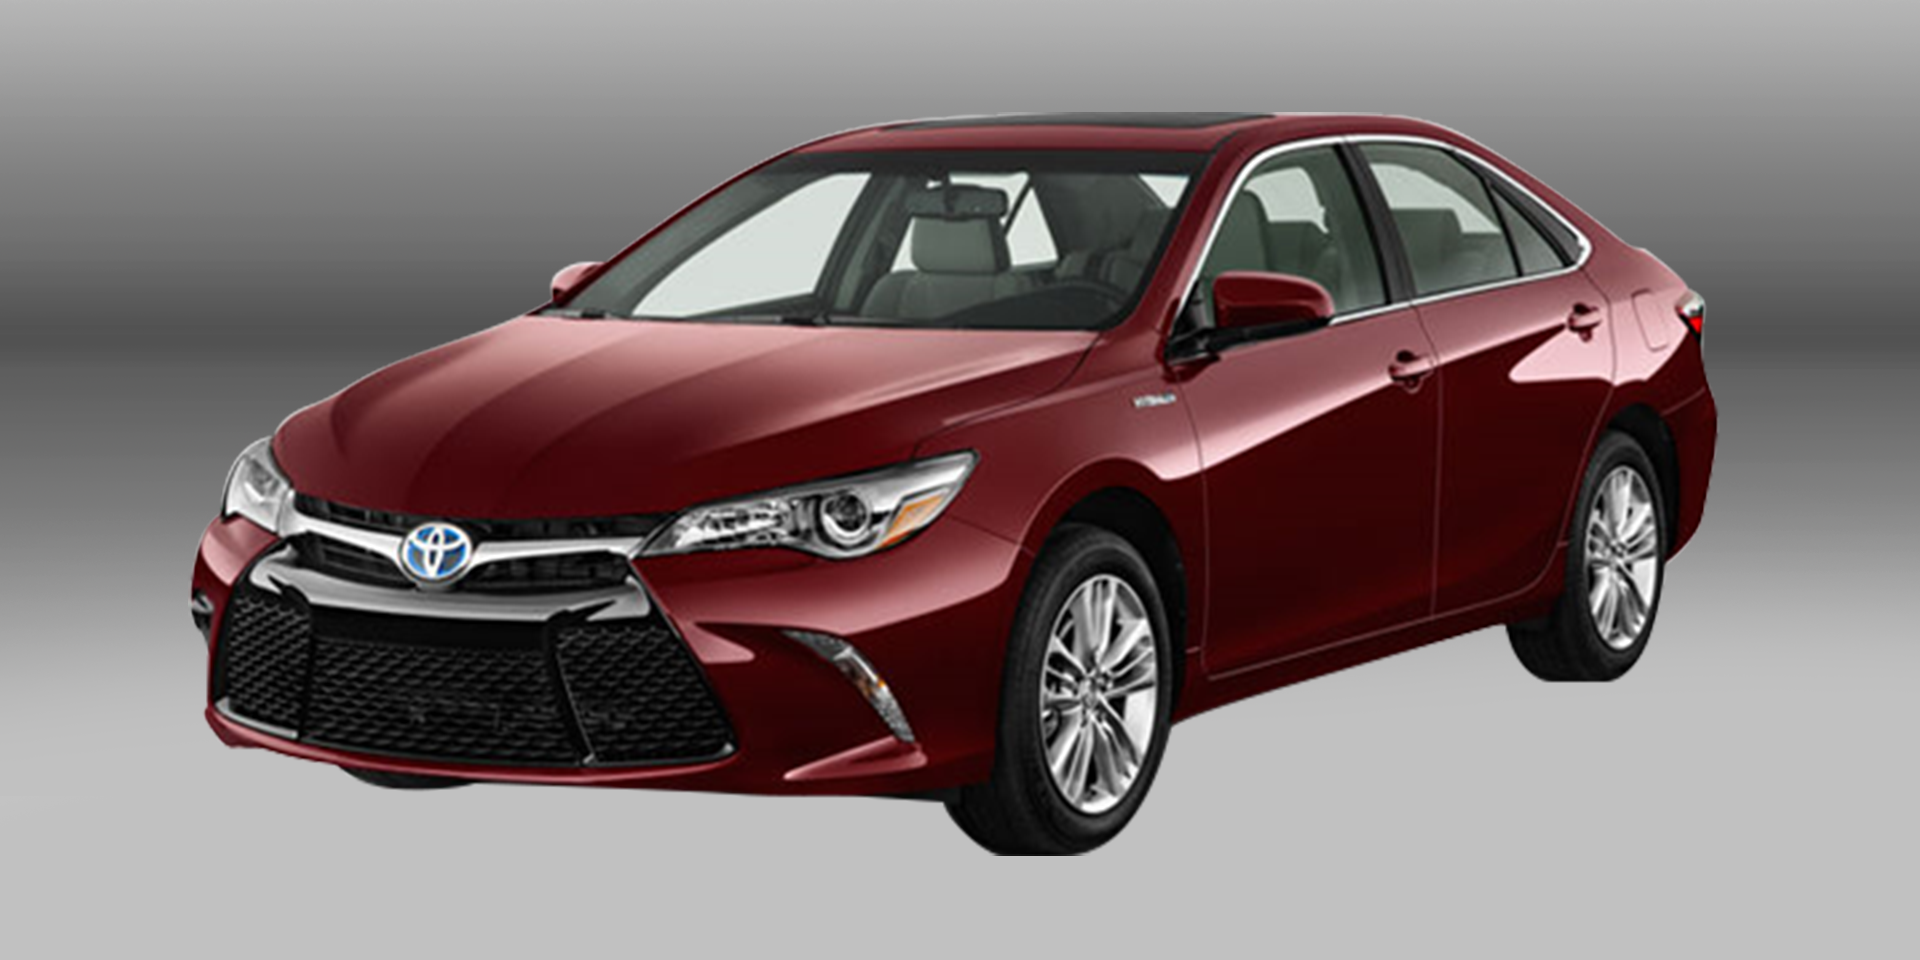 Buyer's guide - Toyota Camry | Pickles, your leading car marketplace